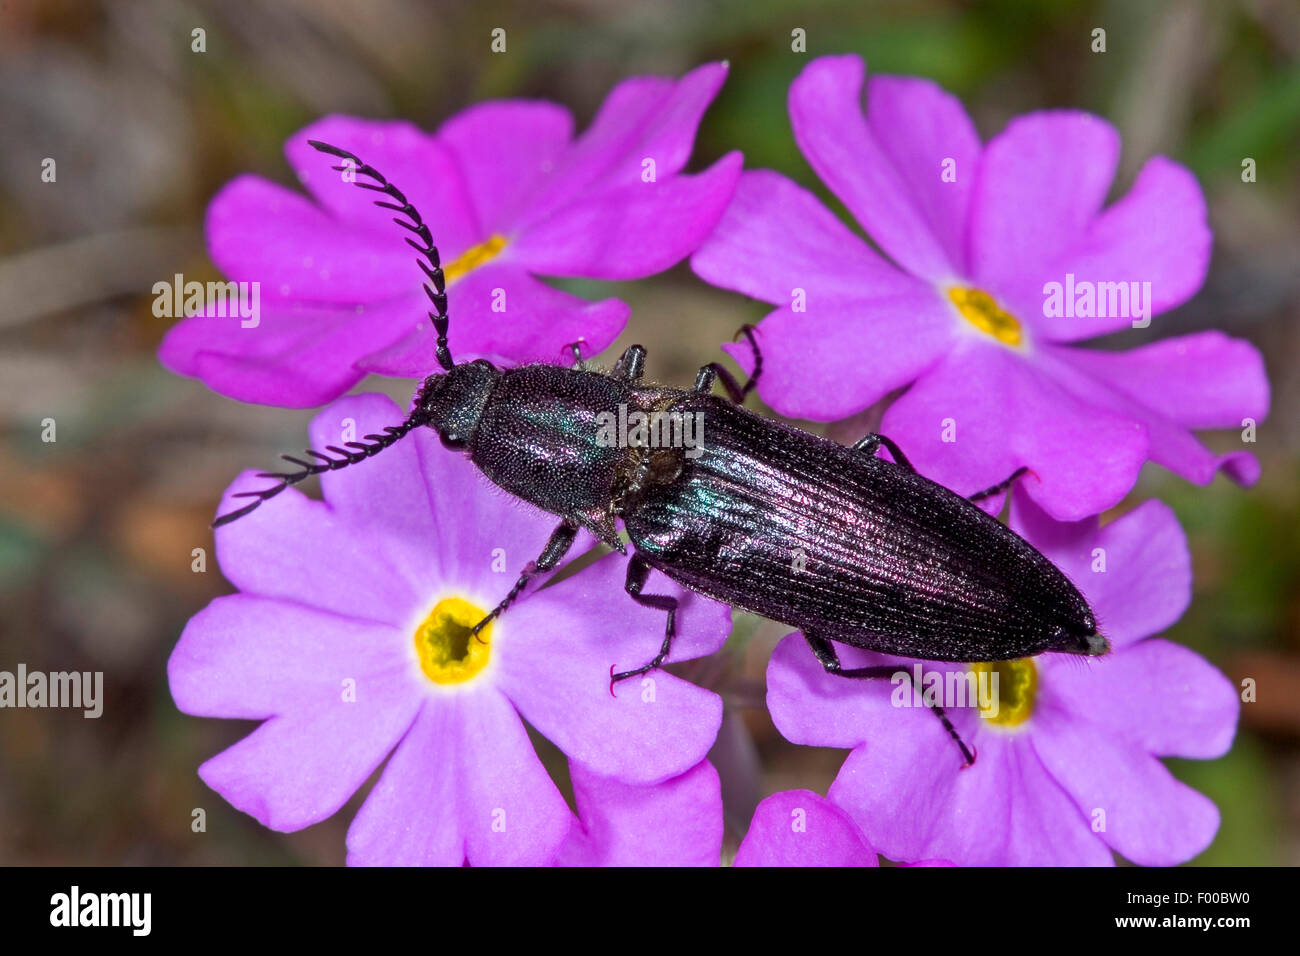 Metallic click beetle, Coppery Click Beetle (Ctenicera cuprea), on lilac flowers, Germany Stock Photo